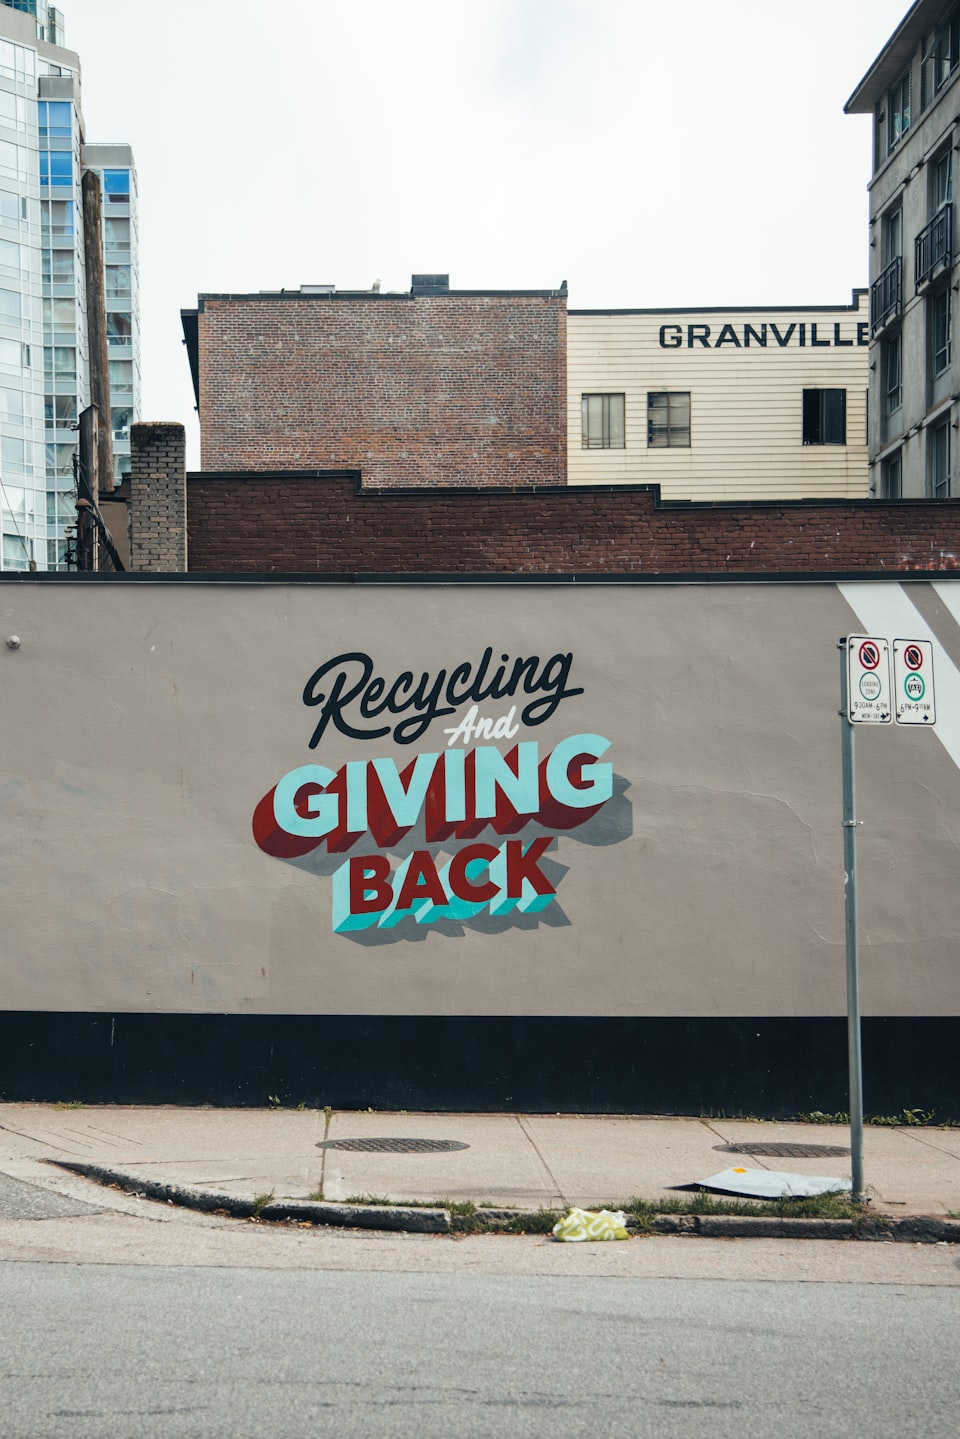 A wall next to a street with the text, "Recycling and GIVING BACK".